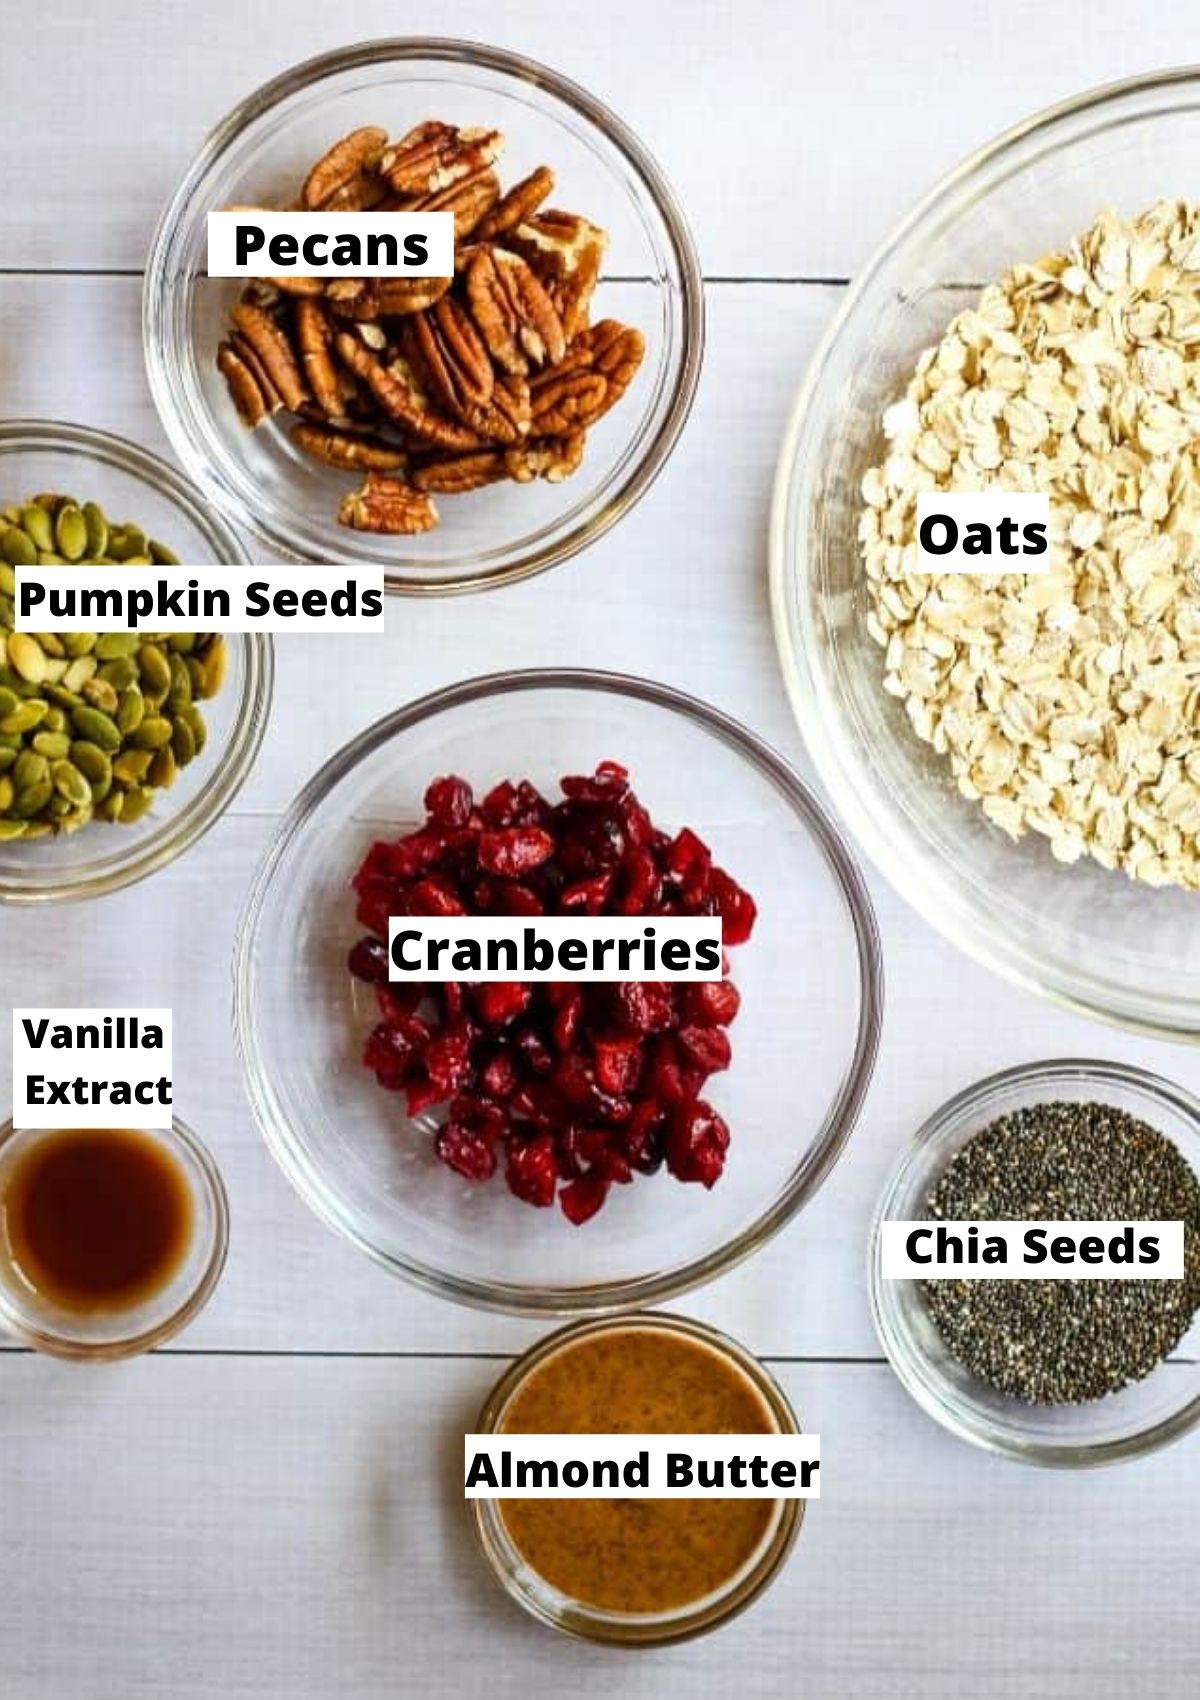 Ingredients for sugar free granola in glass bowls: pecans, oats, pumpkin seeds, cranberries, vanilla extract, almond butter, and chia seeds.